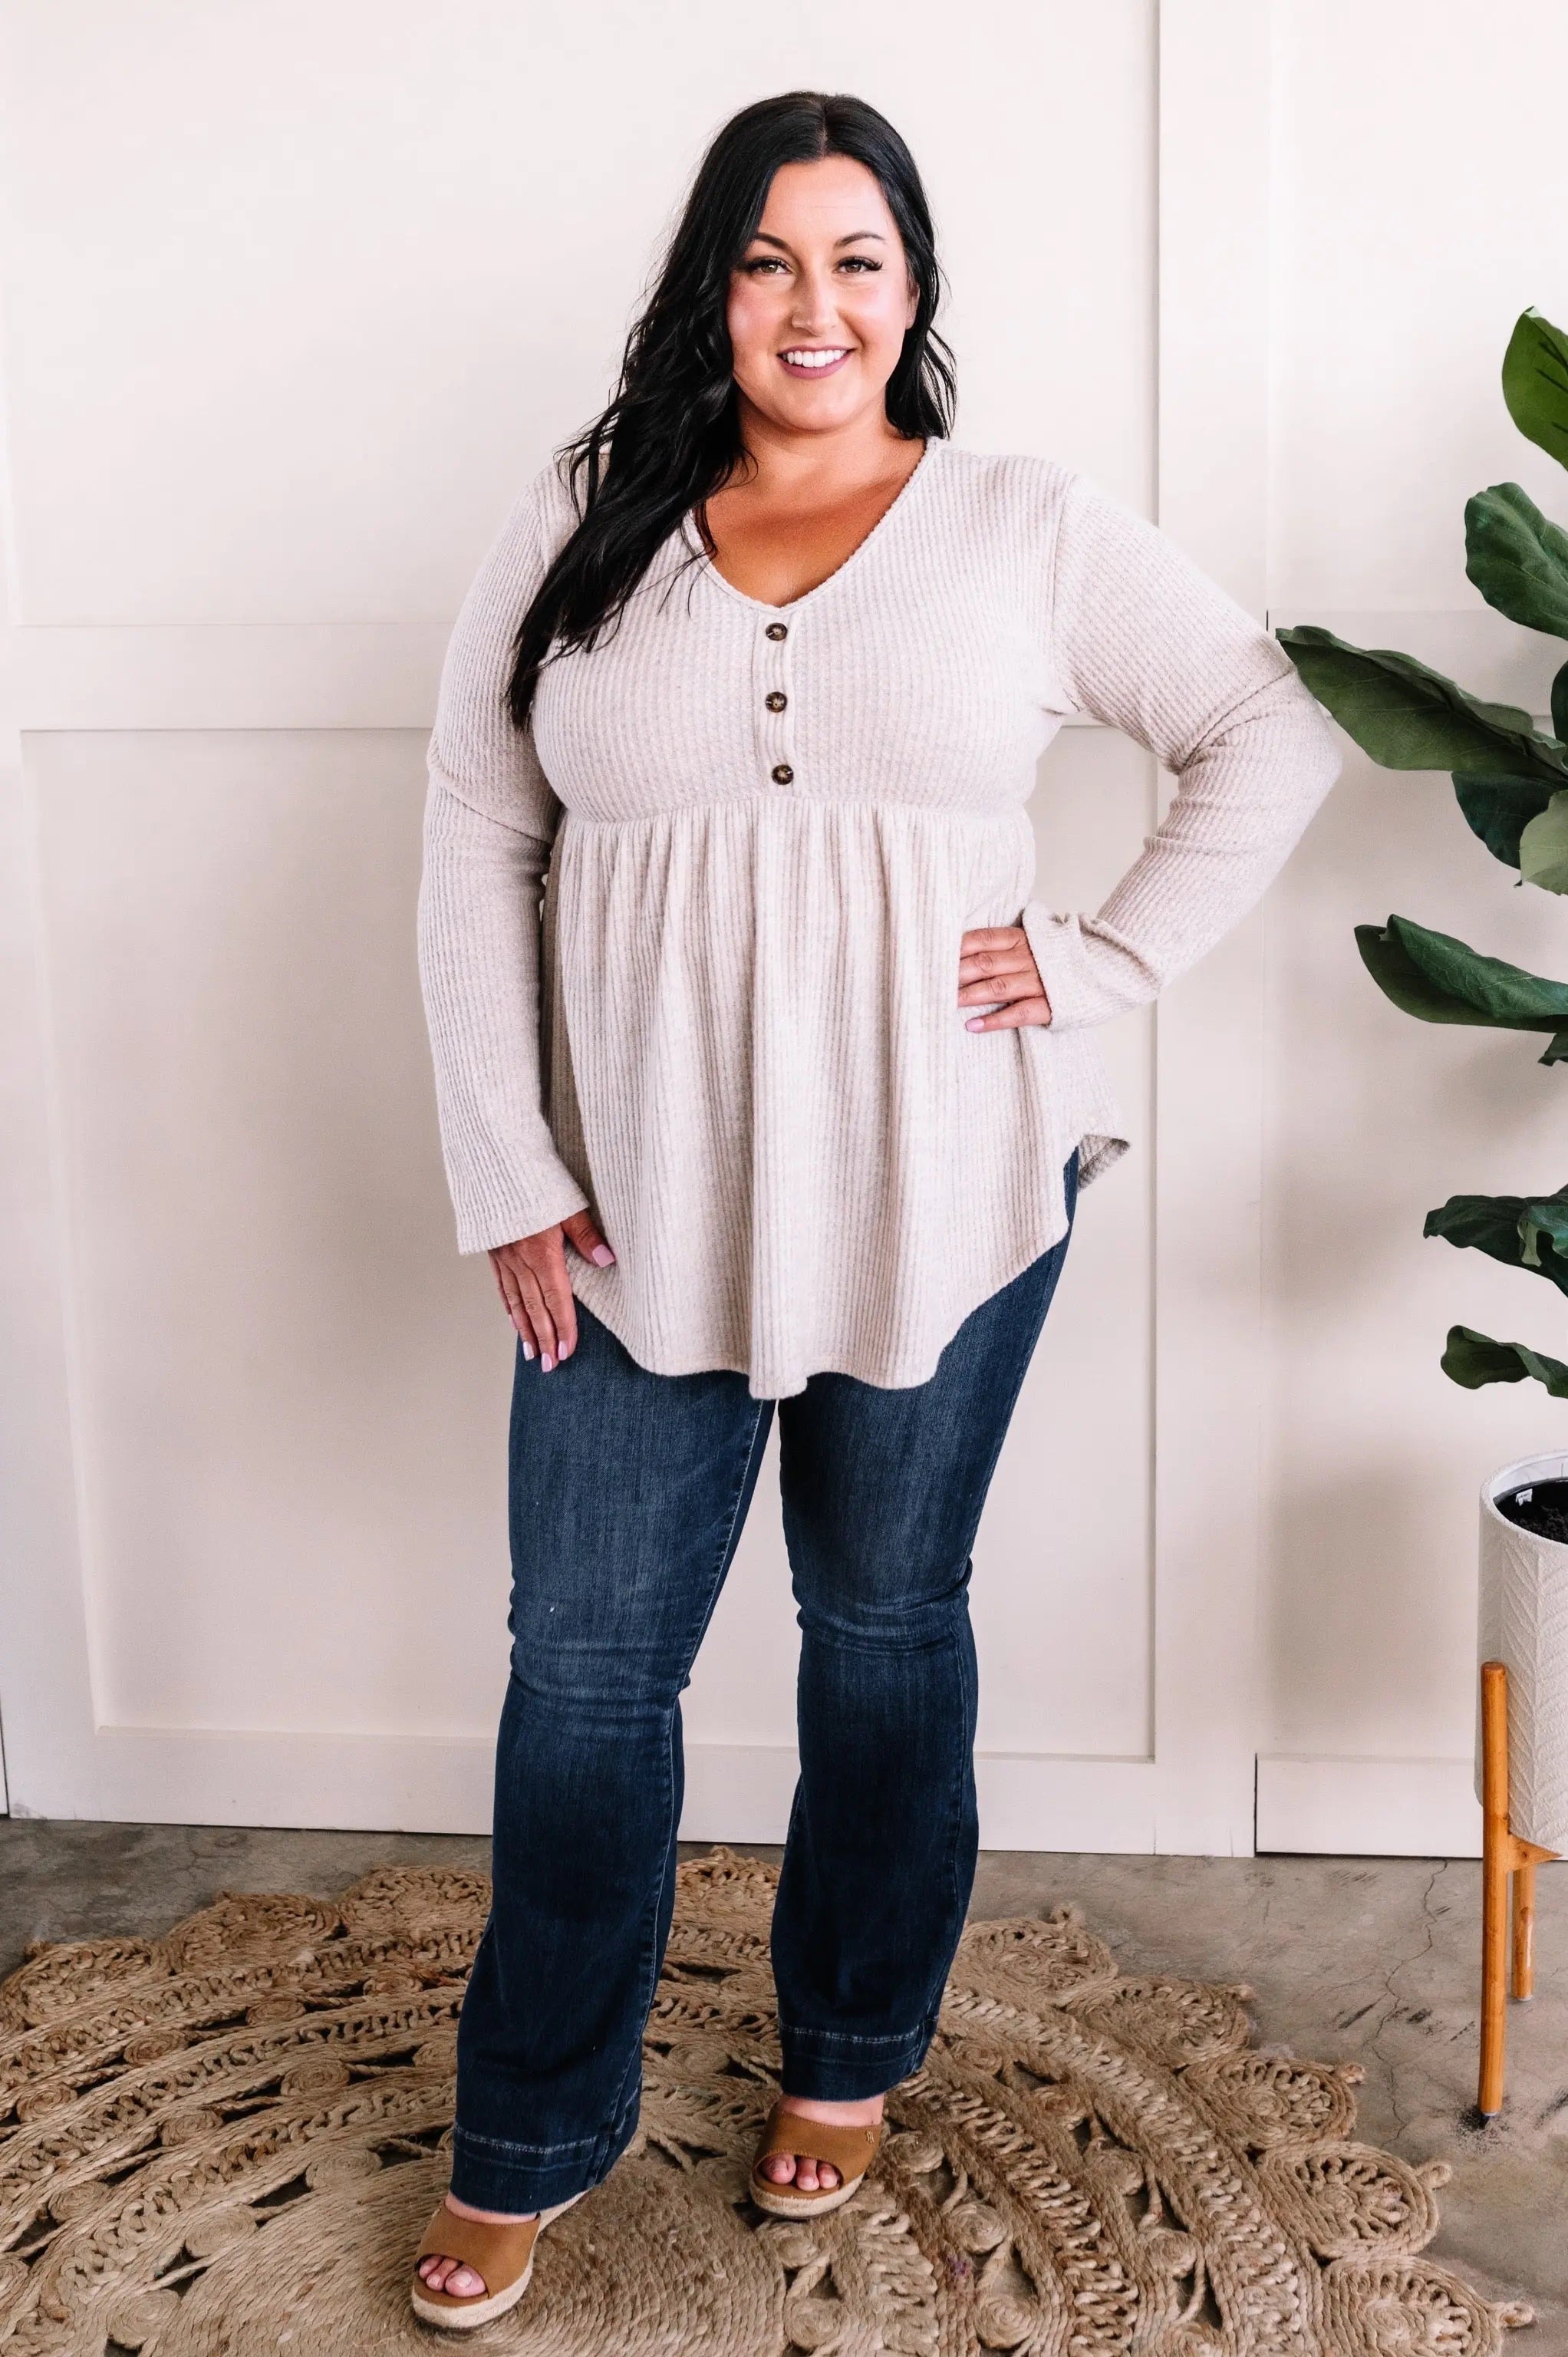 Shop our entire collection of clothing. Offering fashion forward dresses, tops, accessories, shoes and bottoms, we ship nationwide! You will love our trendy boutique fashions at affordable prices. Styled by Steph Online Boutique Granger, IN